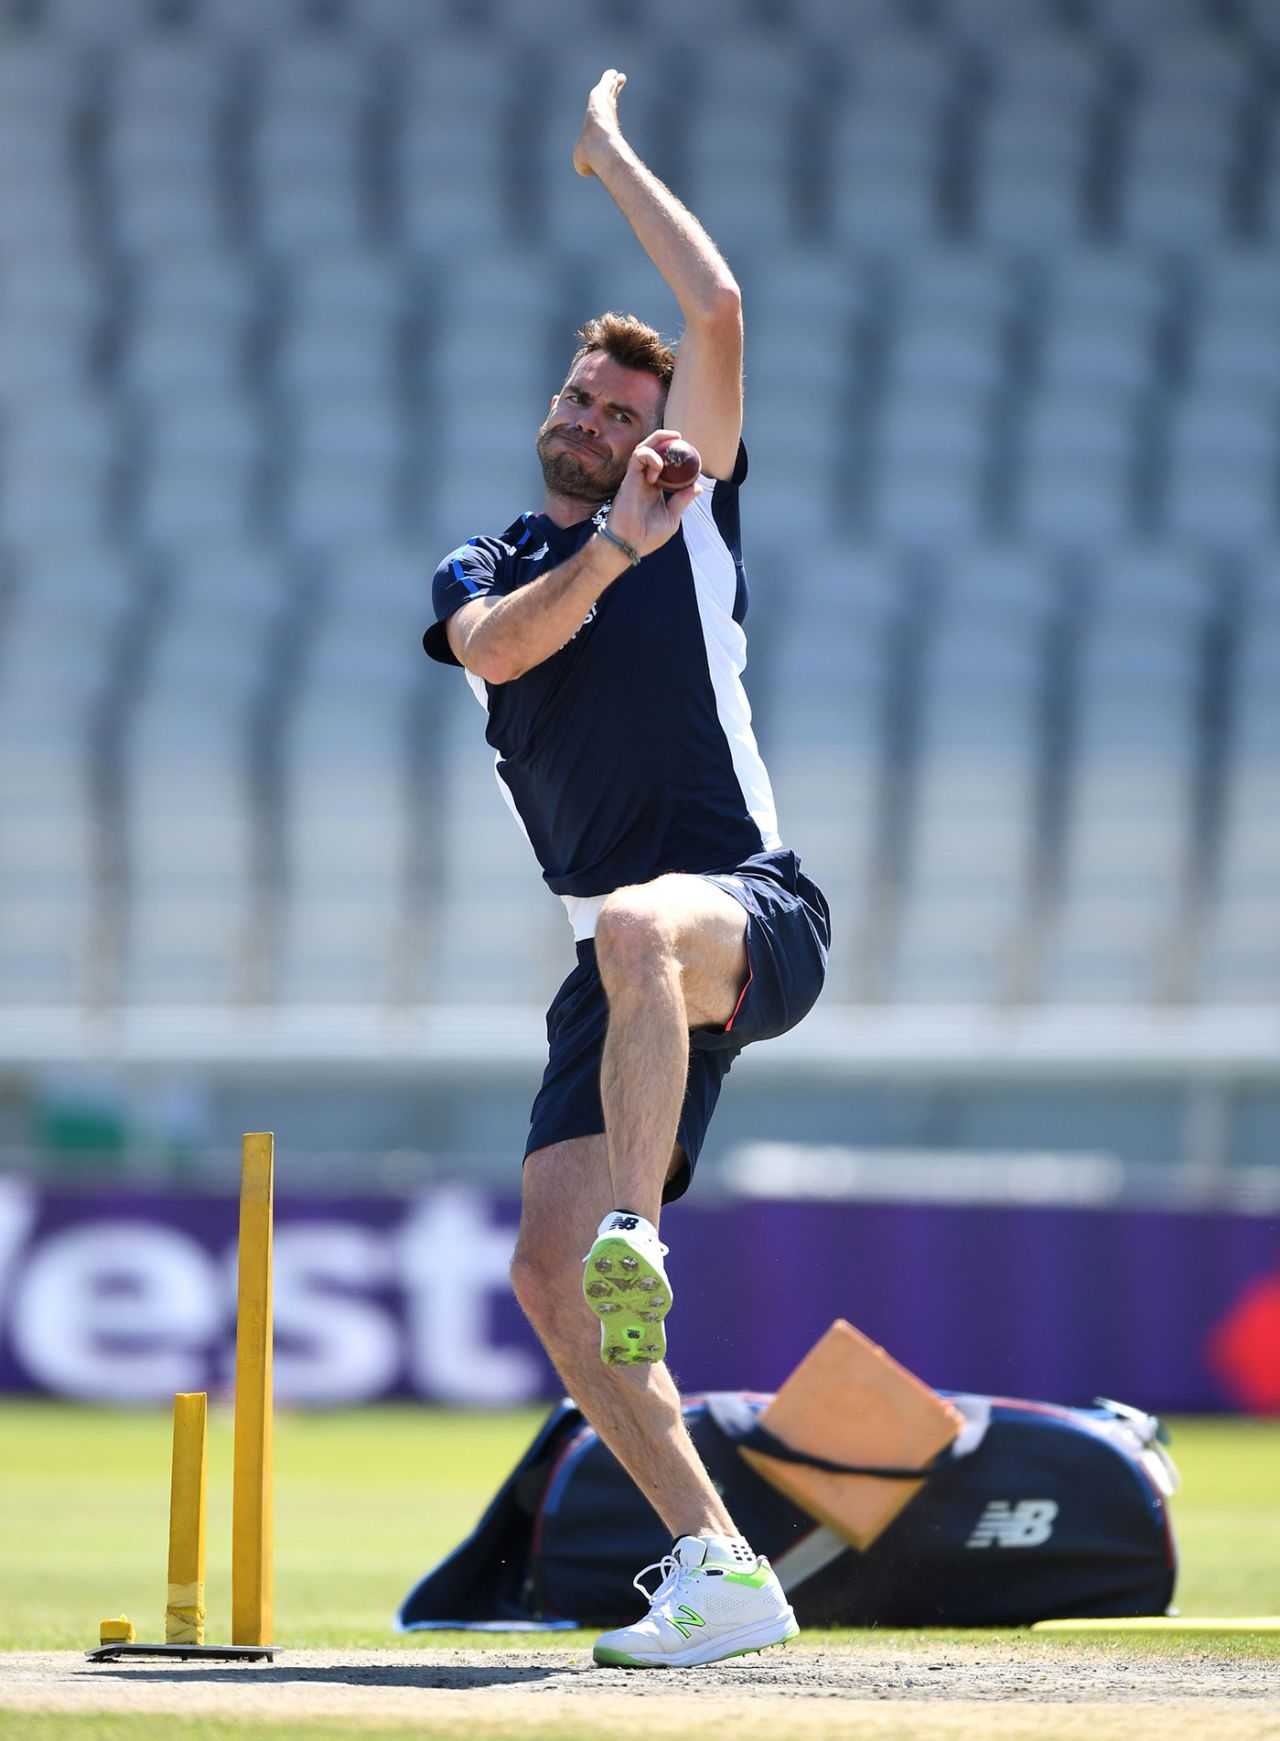 James Anderson working his way back to fitness, Old Trafford, July, 2018